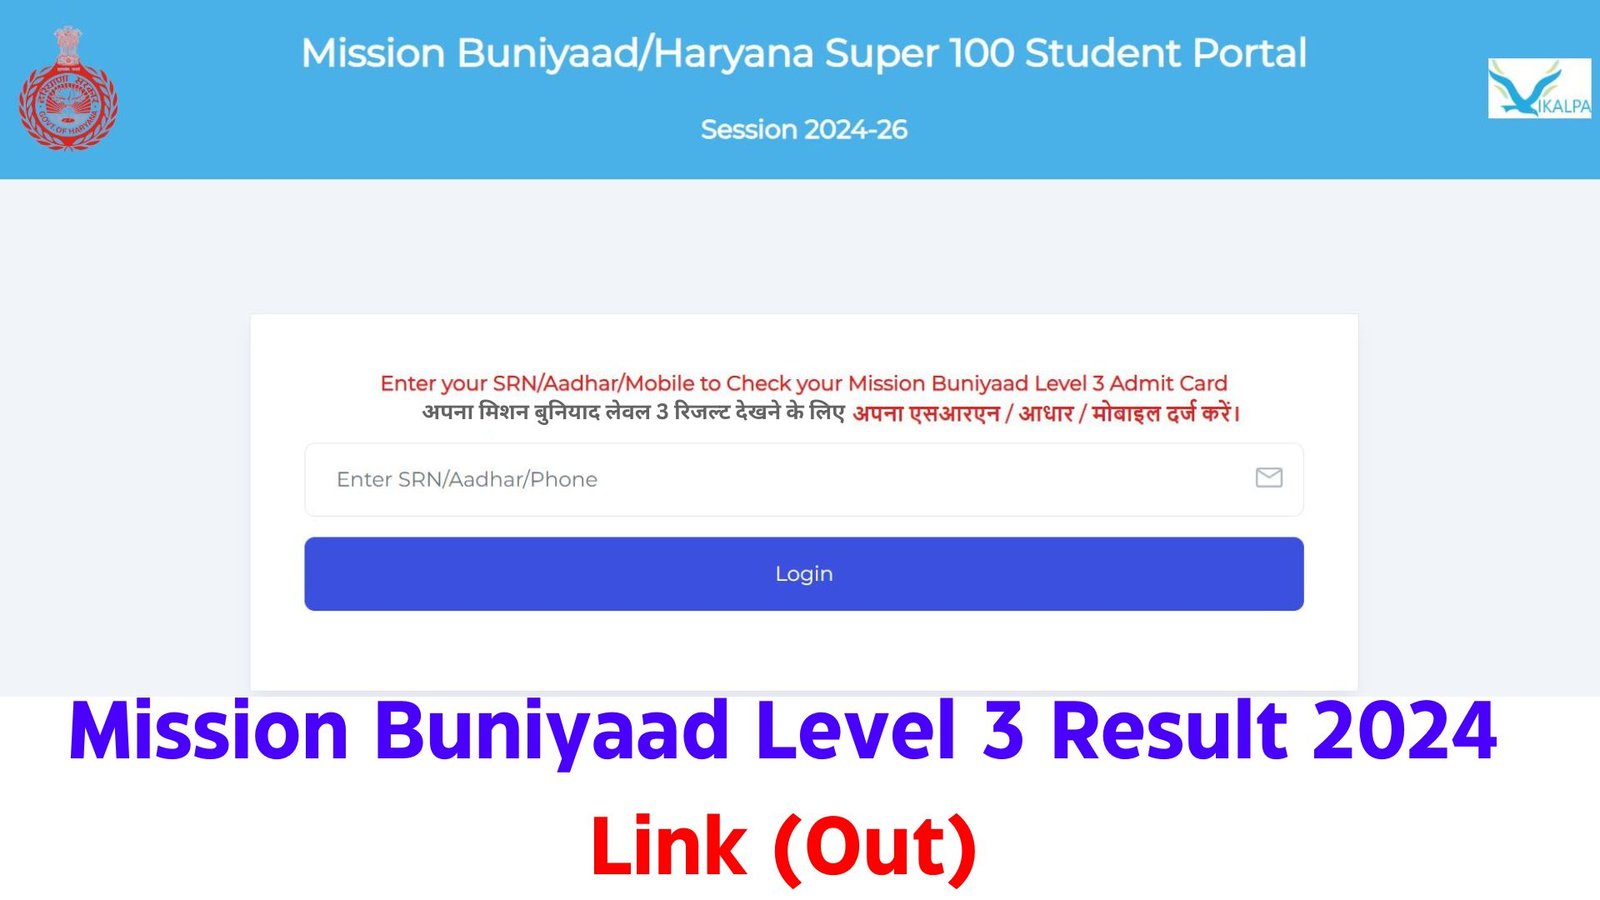 Mission Buniyaad Level 3 Result 2024 Download Link Out